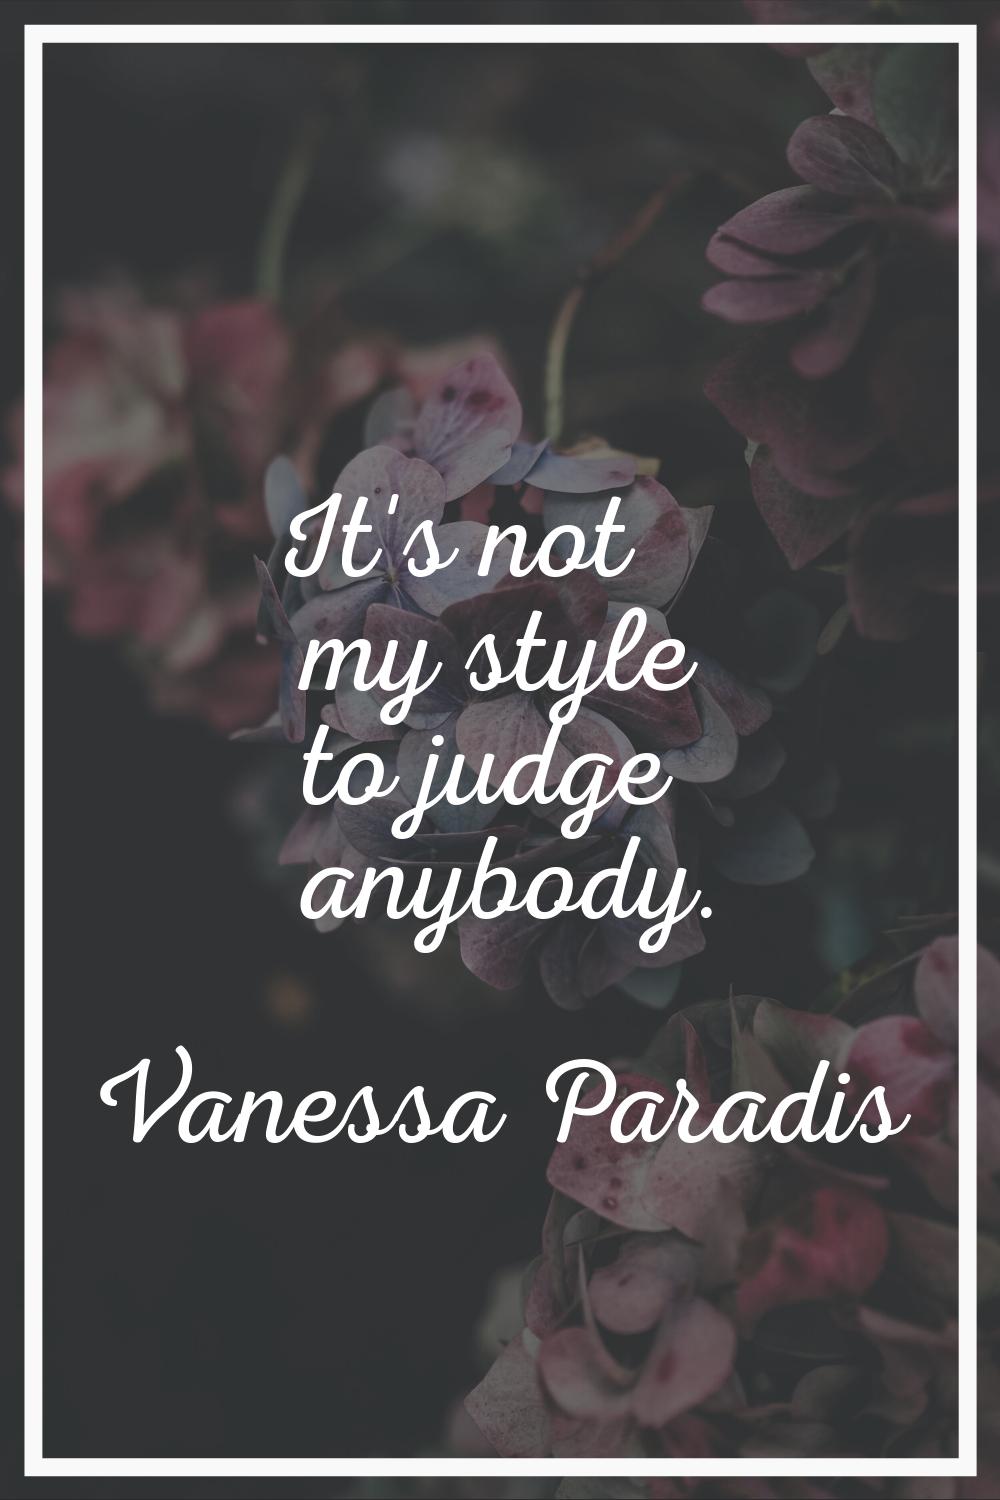 It's not my style to judge anybody.